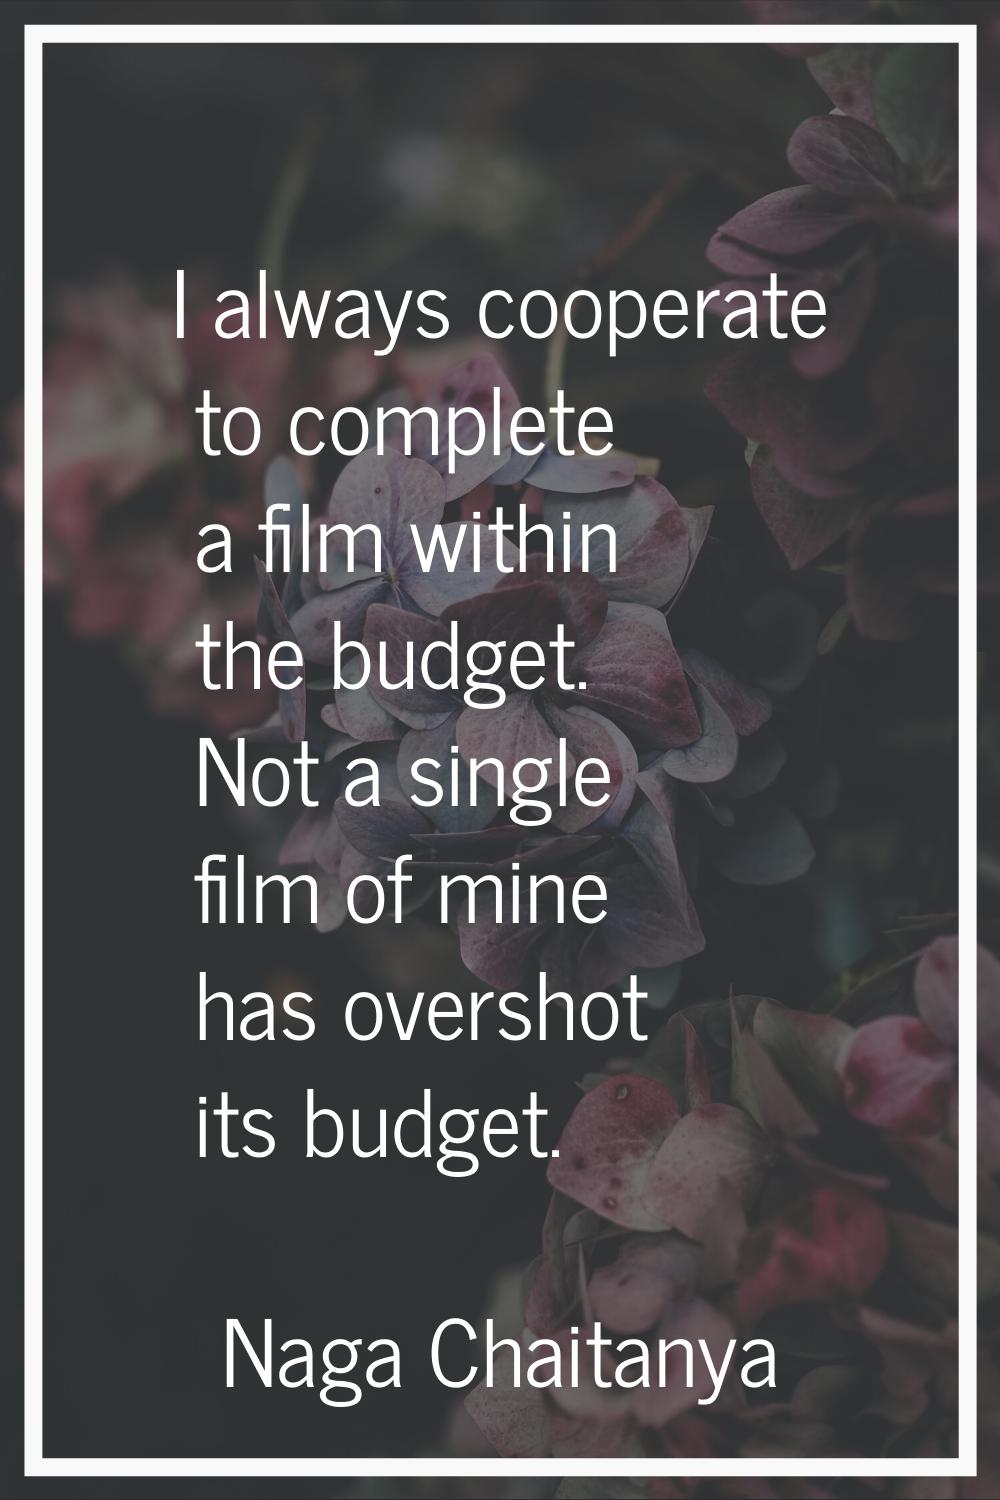 I always cooperate to complete a film within the budget. Not a single film of mine has overshot its